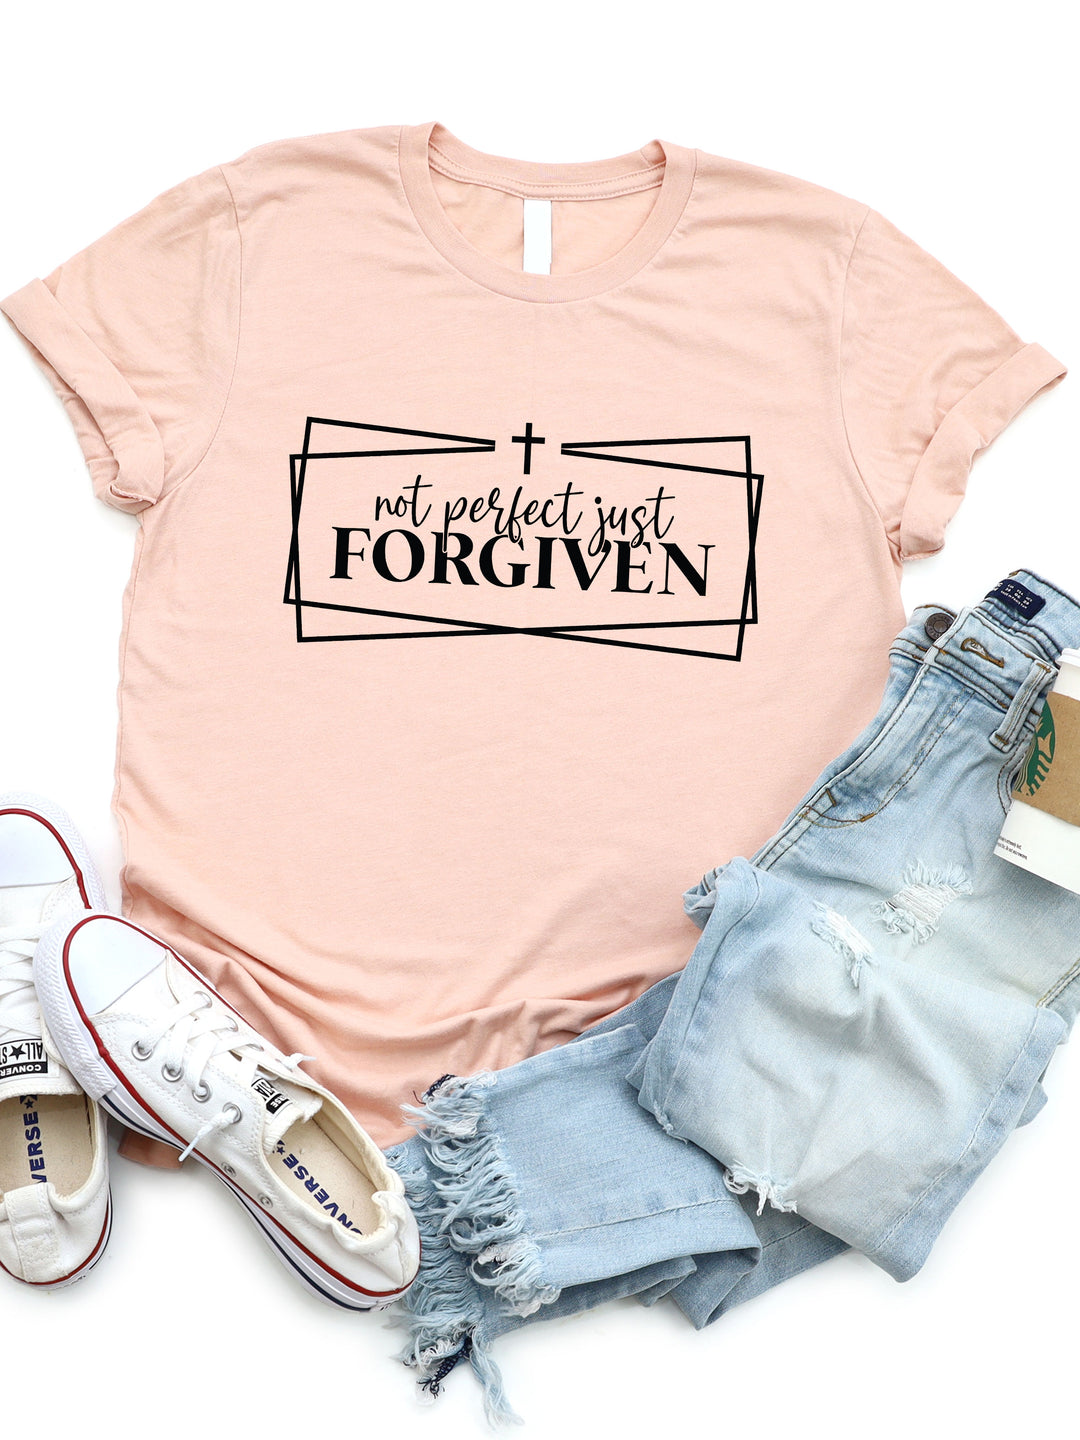 Just Forgiven Graphic Tee